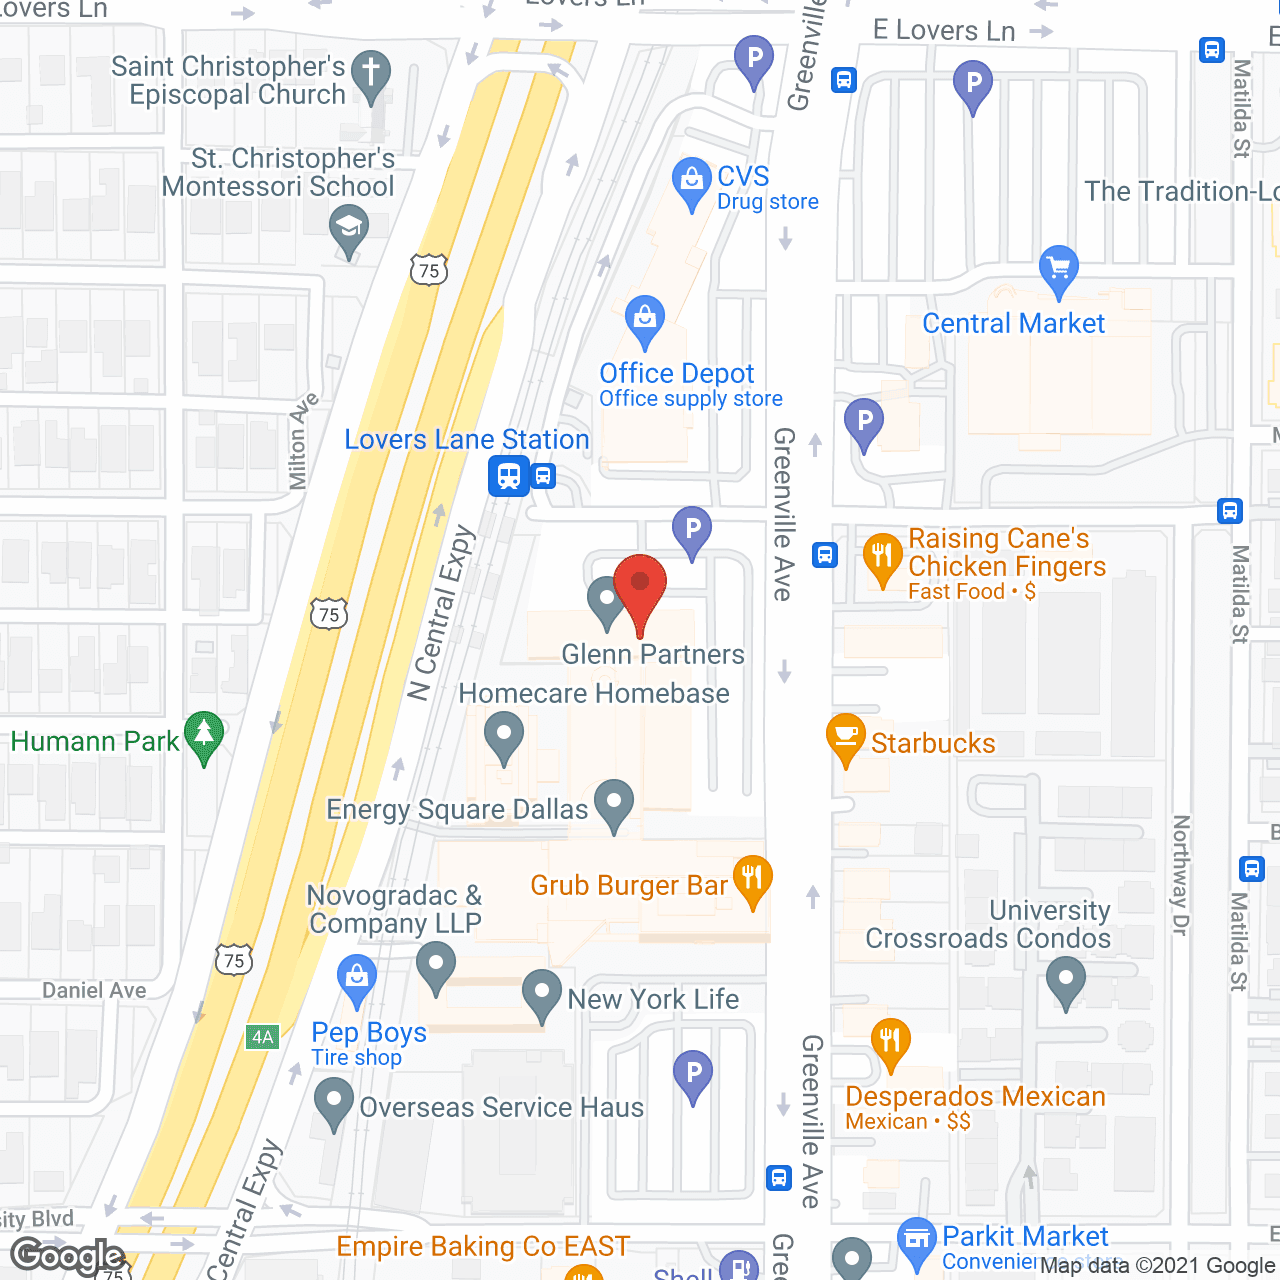 Visiting Angels of Dallas, TX in google map